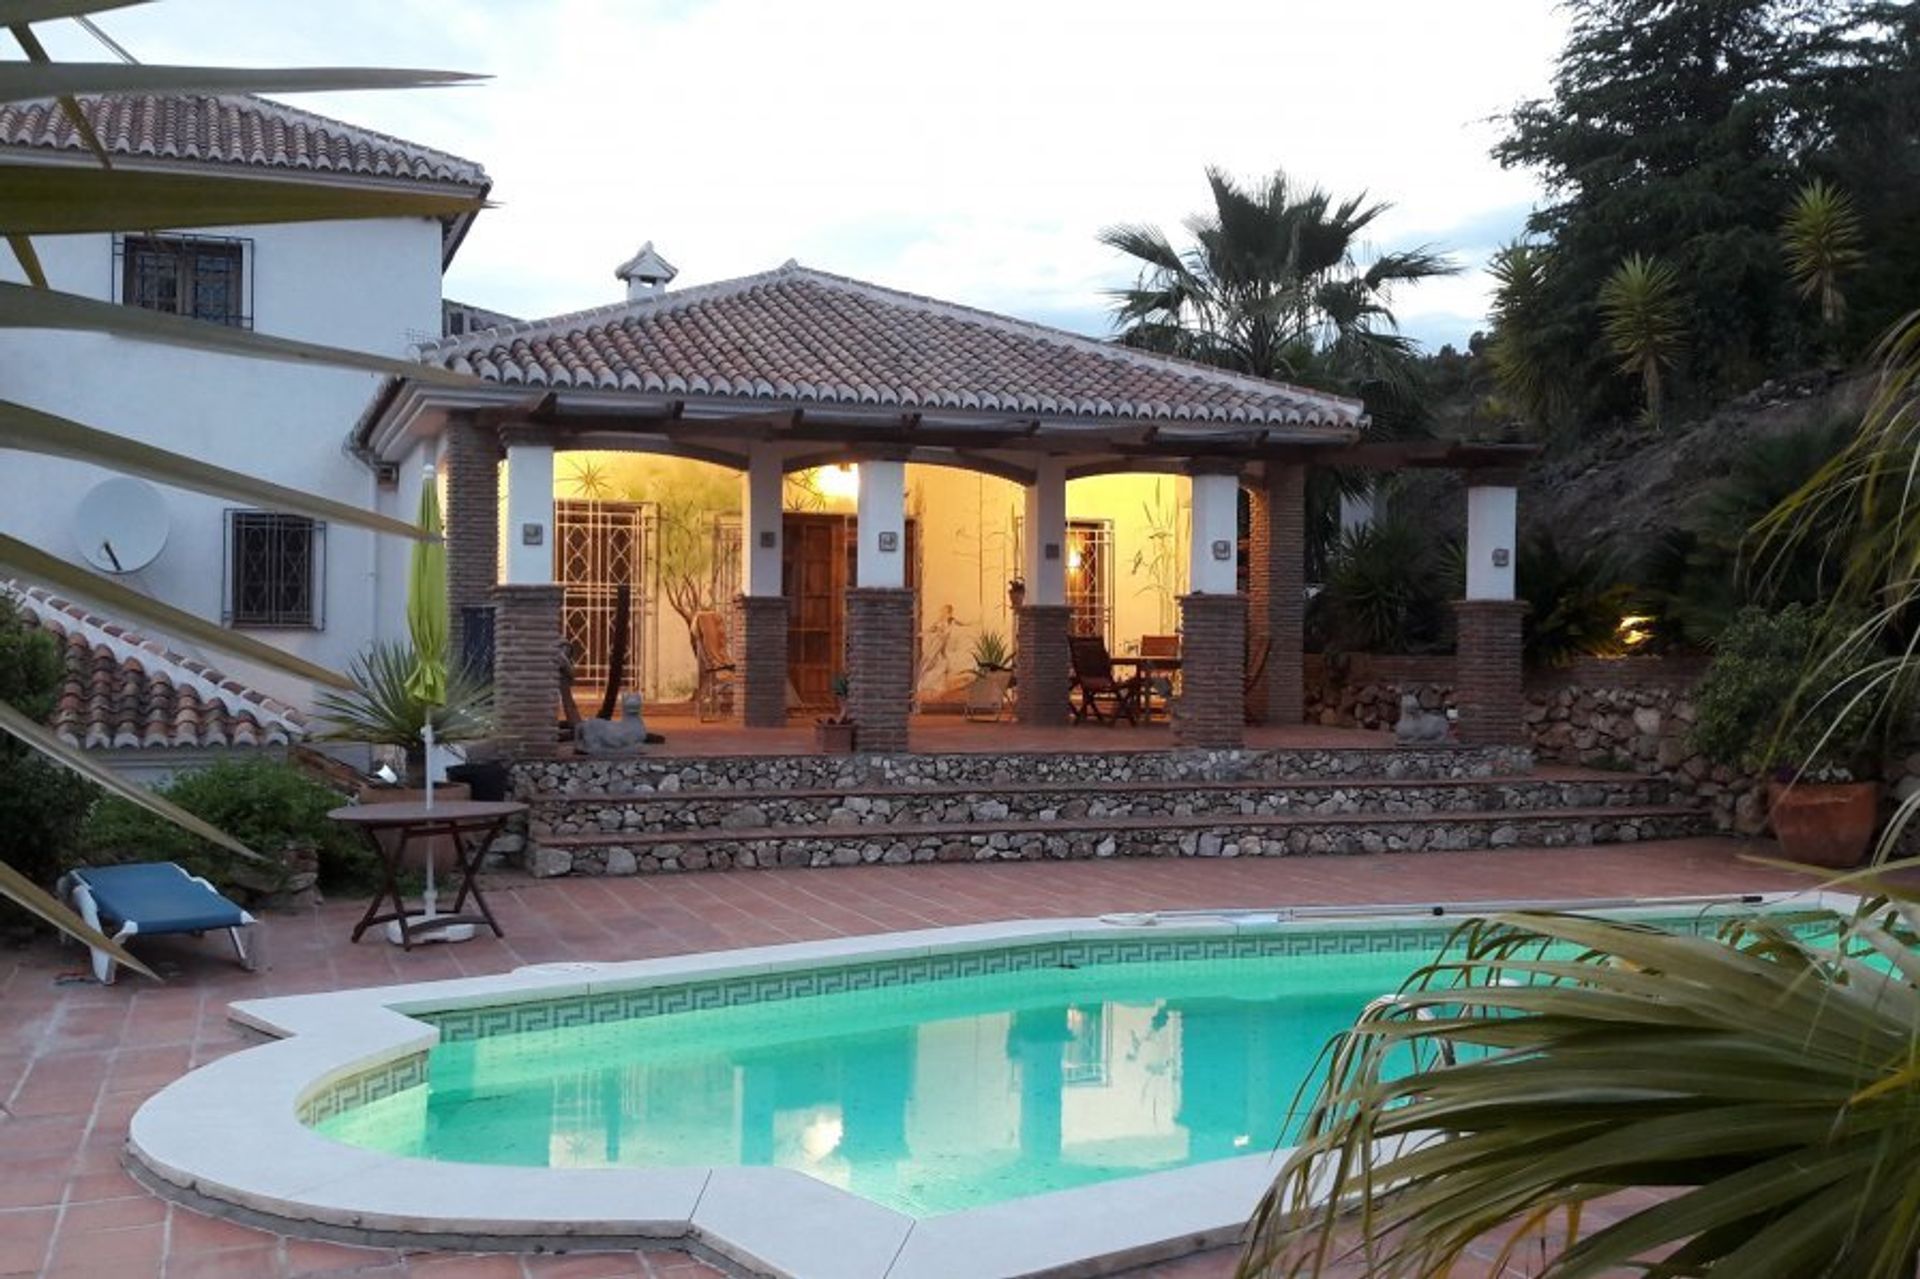 Stay in one of our villas with private pools overlooking the mountains and vineyards